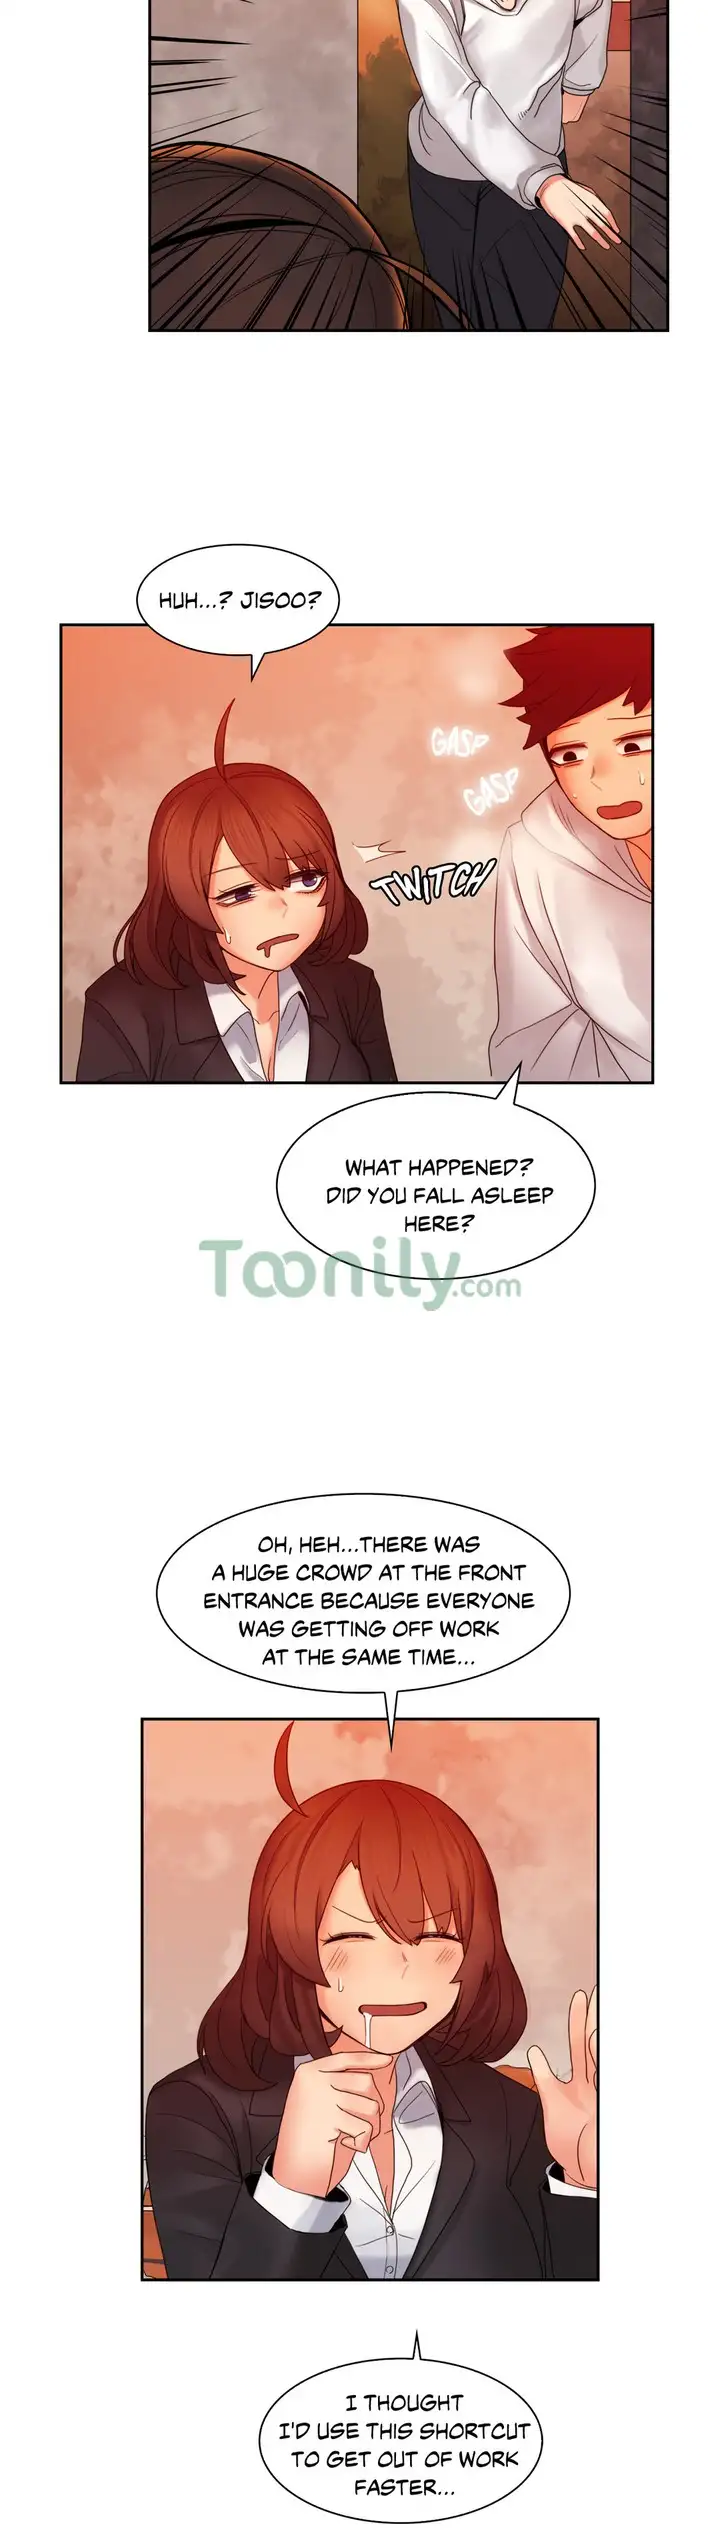 The Girl That Got Stuck in the Wall - Chapter 9 Page 2